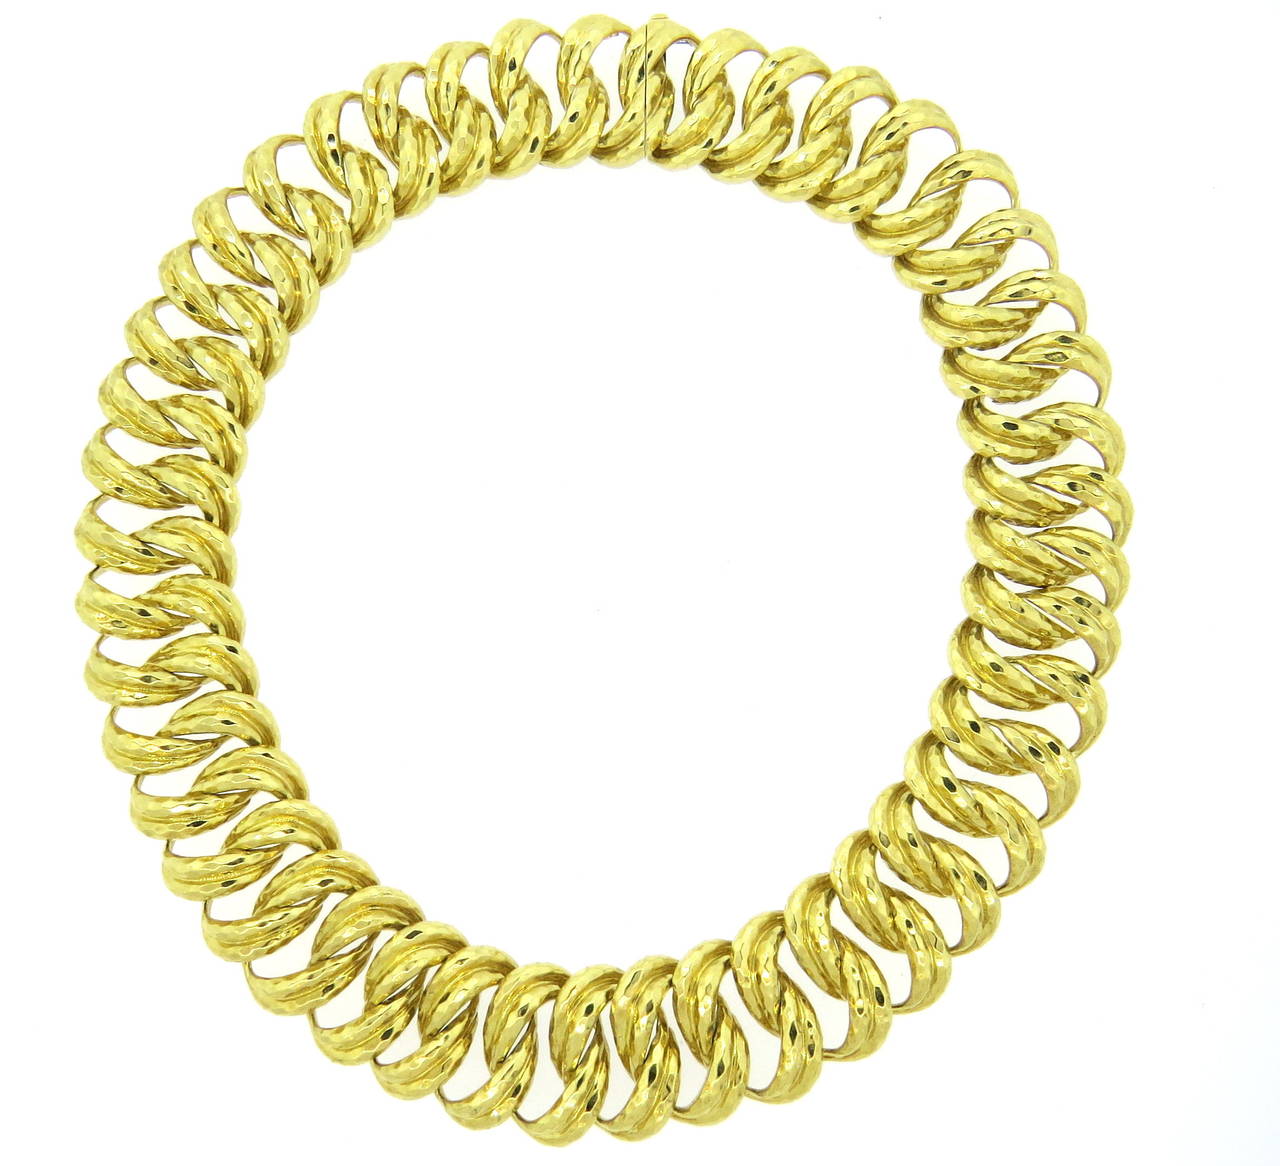 An 18k yellow gold necklace with a hammered finish.  Crafted by Henry Dunay, the necklace is 17